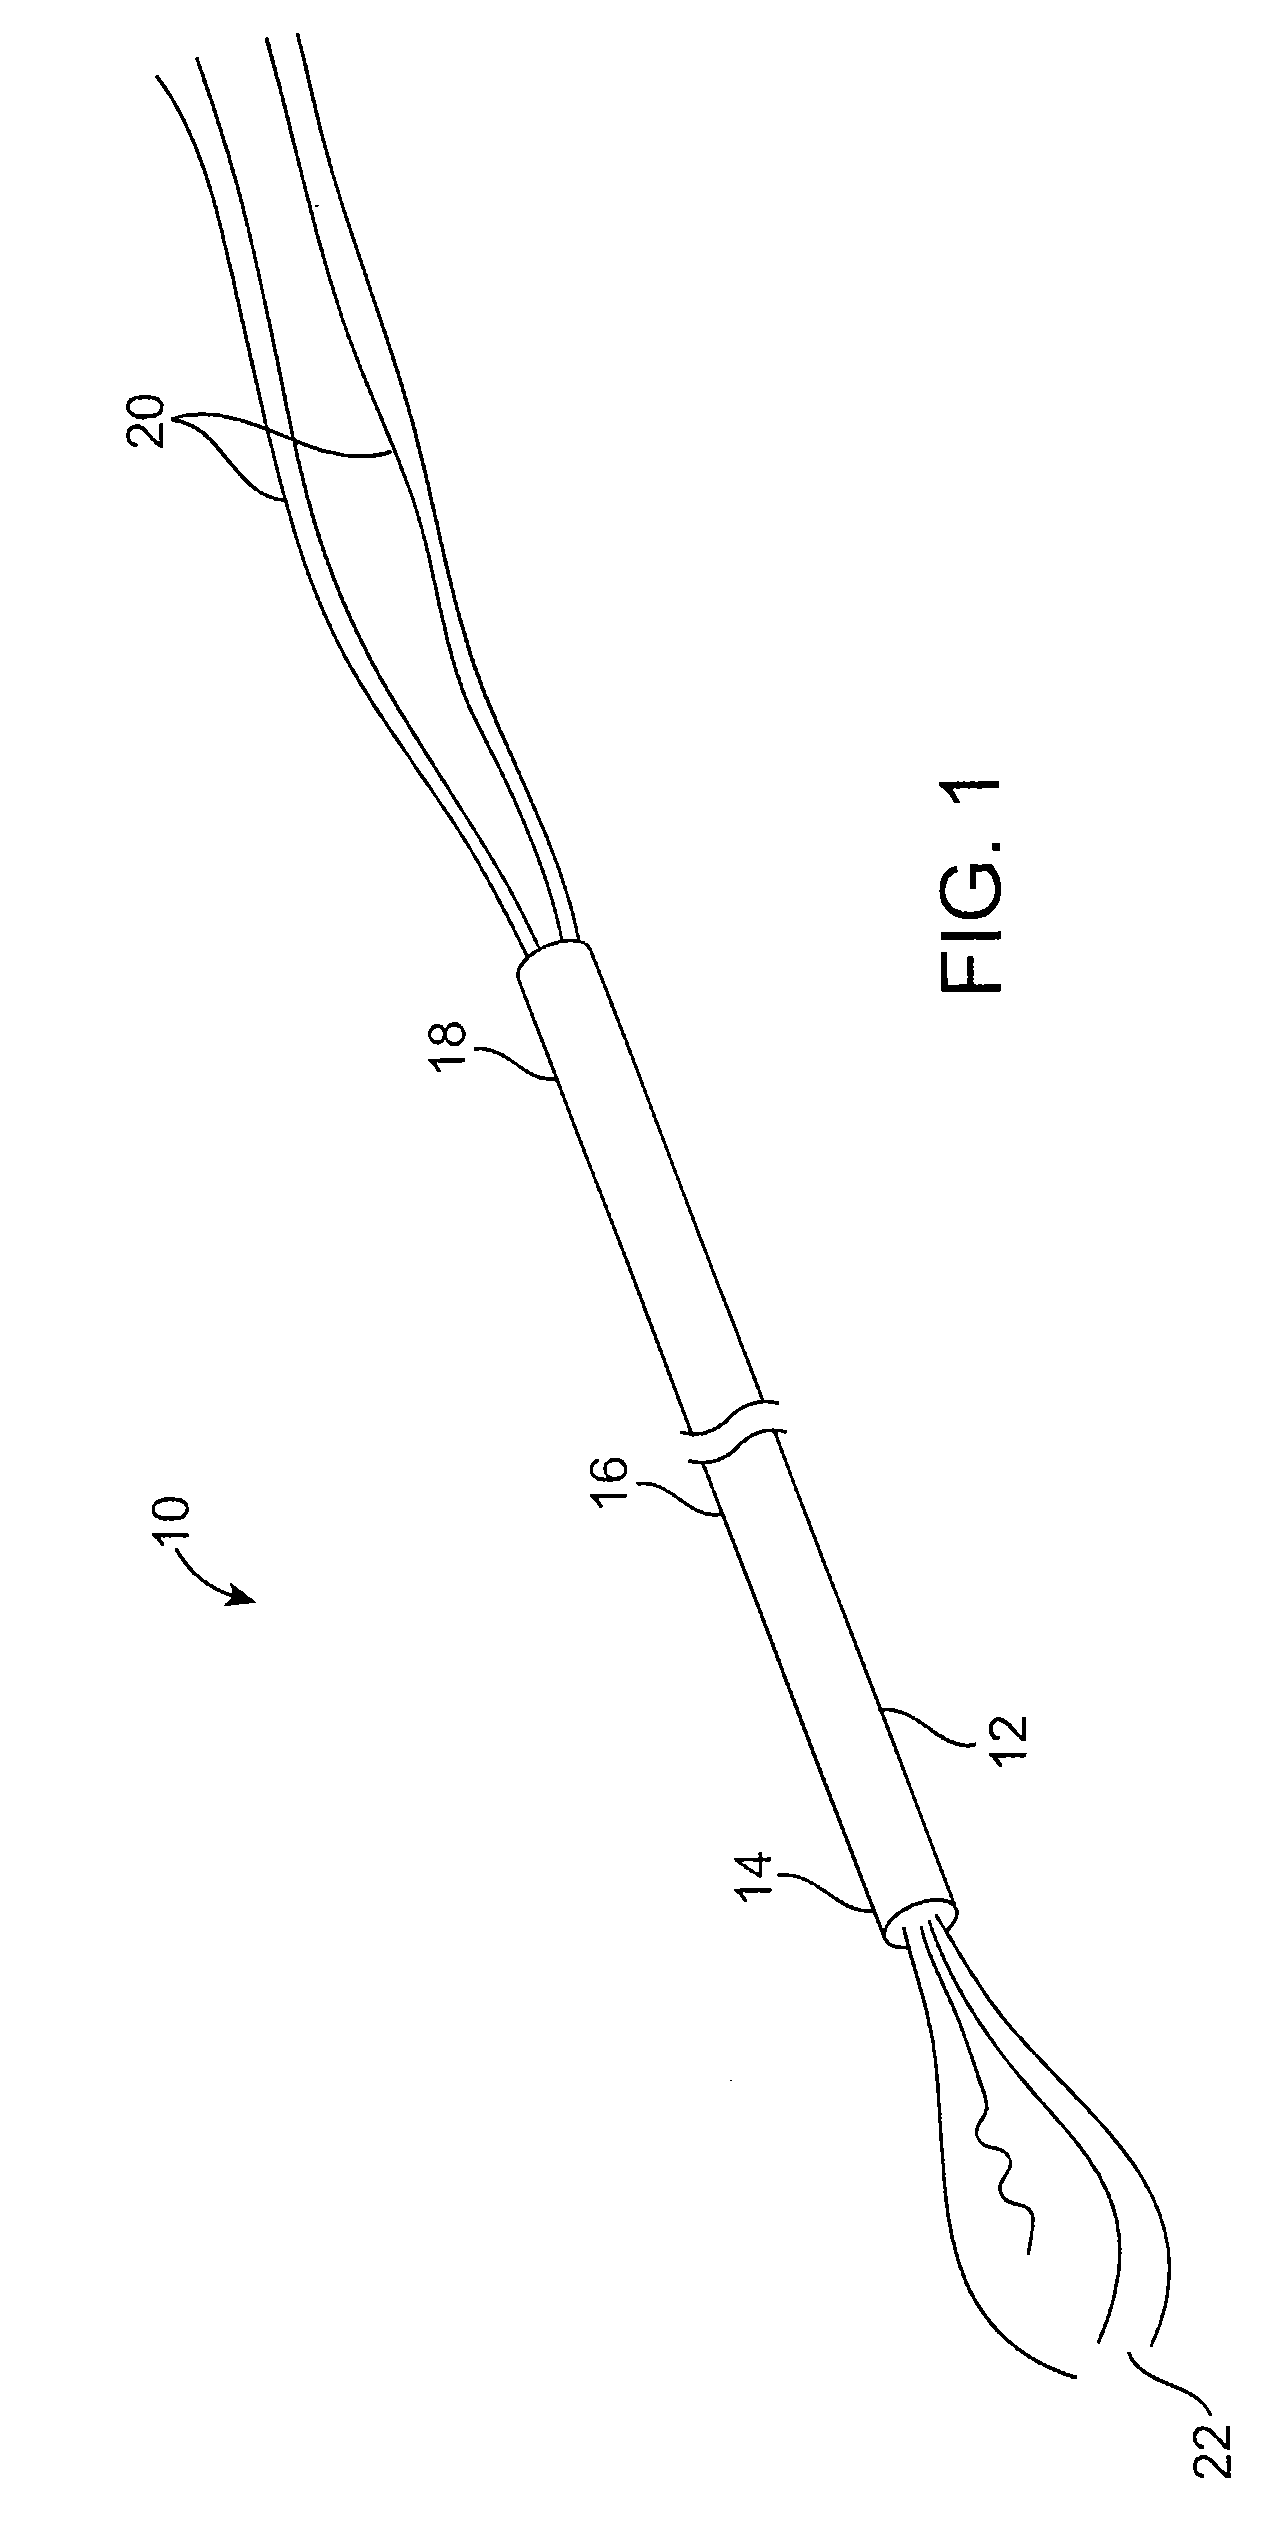 Multi-tine probe and treatment by activation of opposing tines